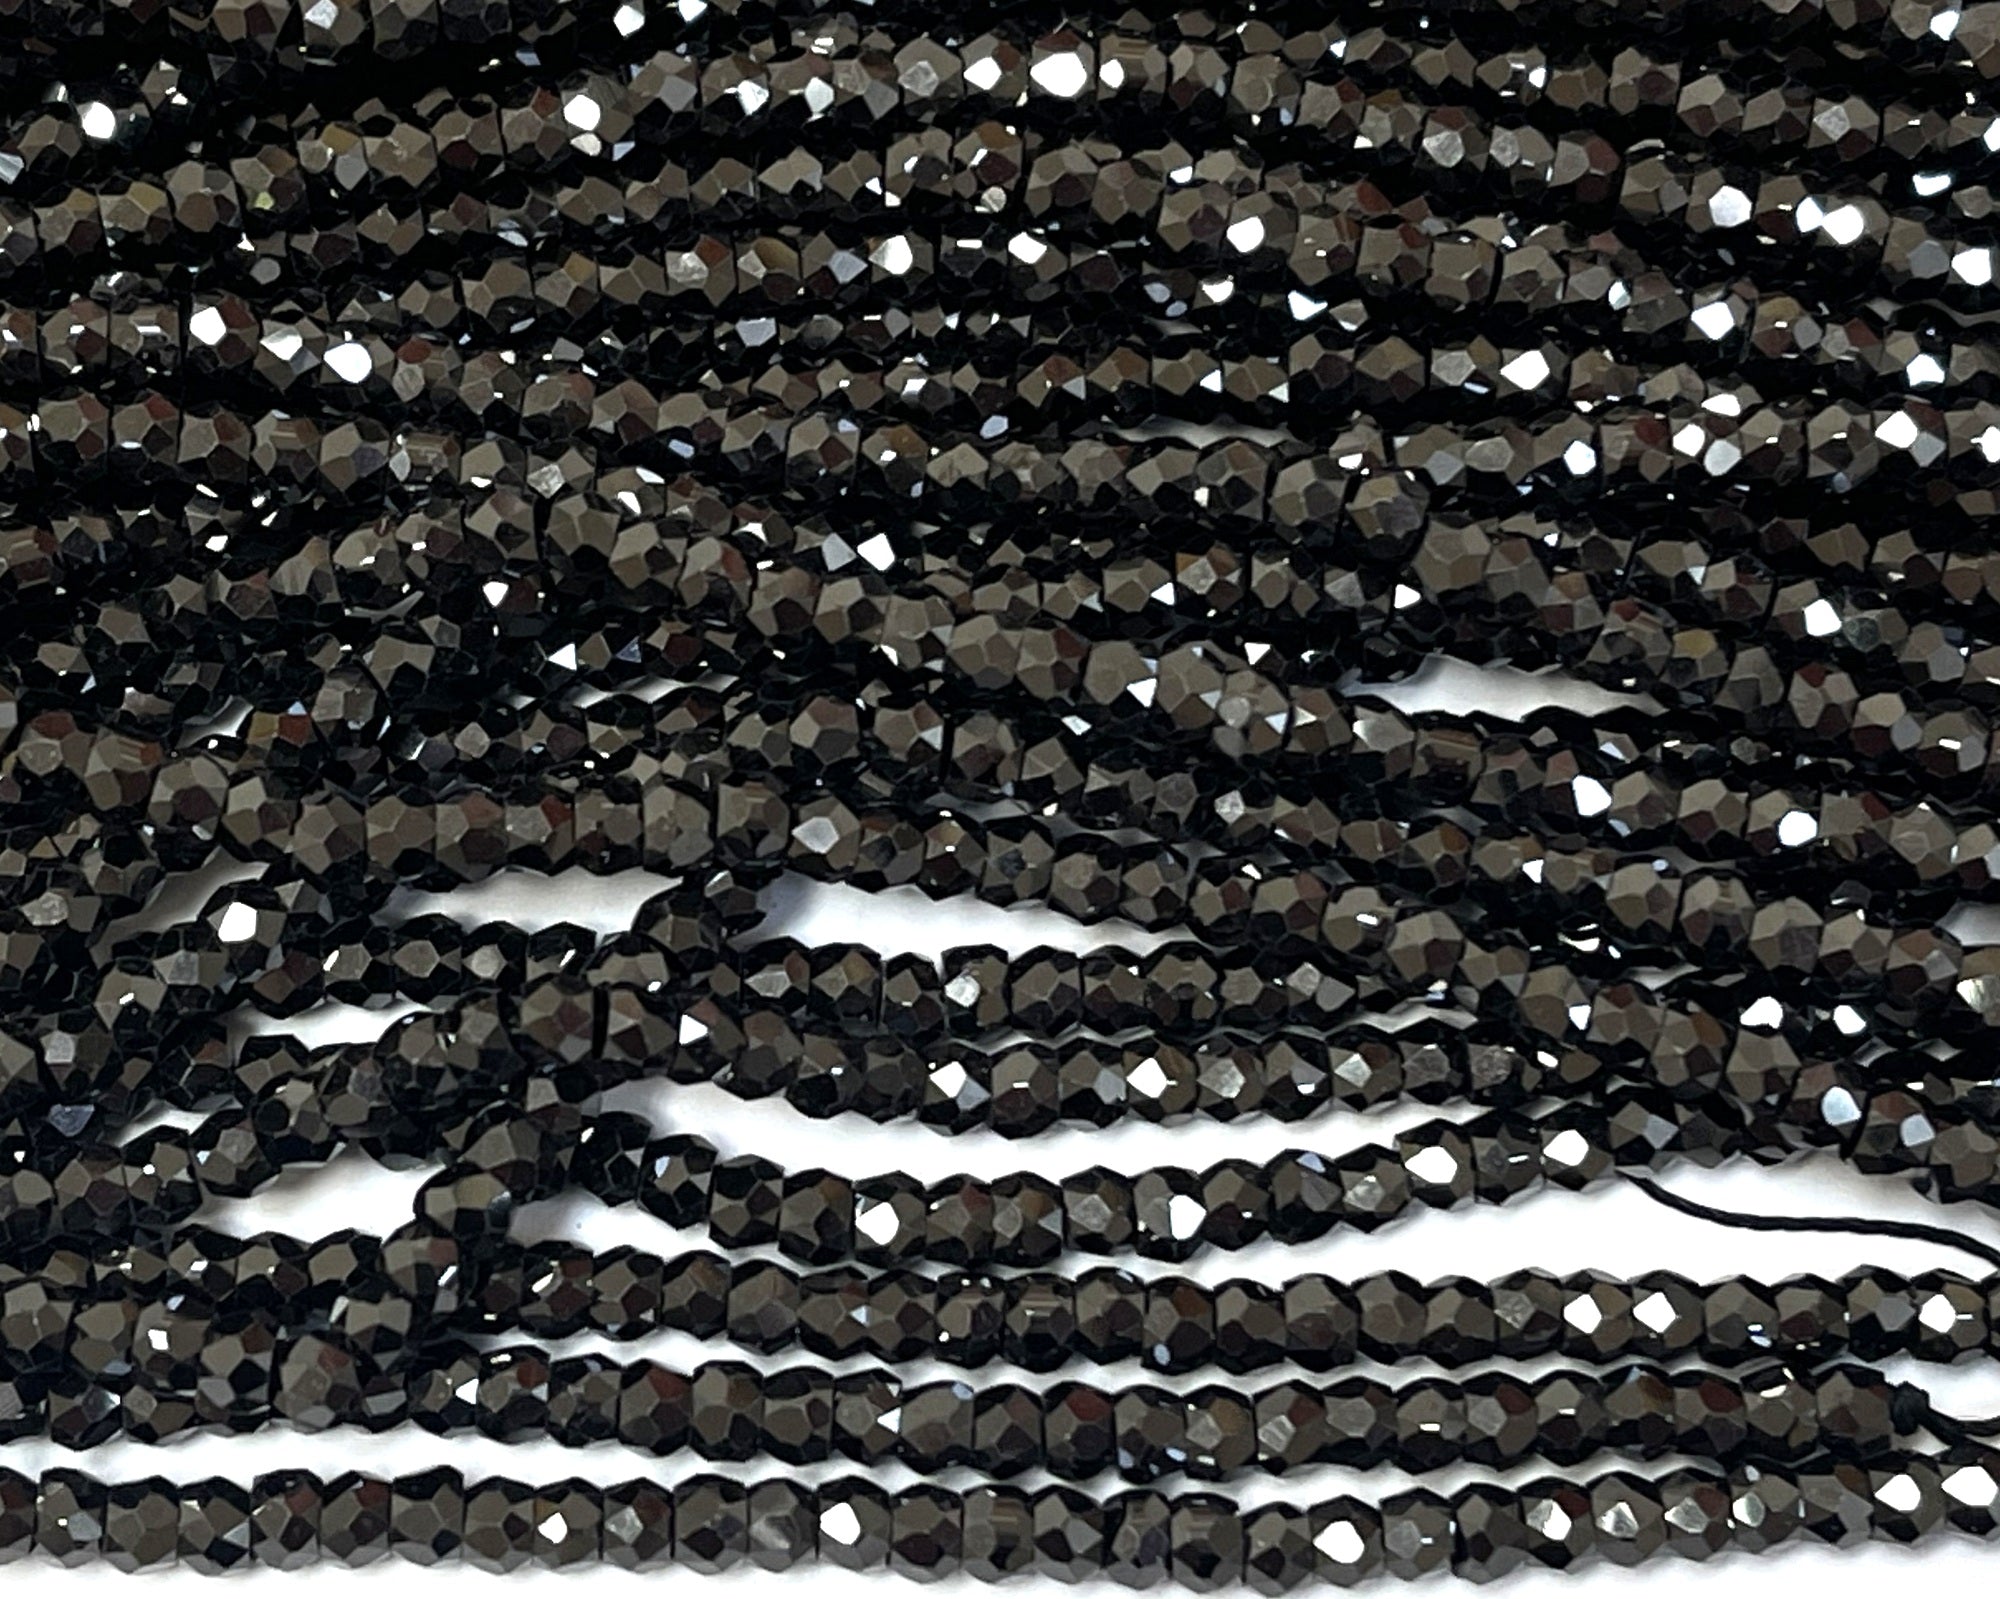 Black Zircon 3x2mm rondelle micro faceted sparkling CZ beads 15" strand